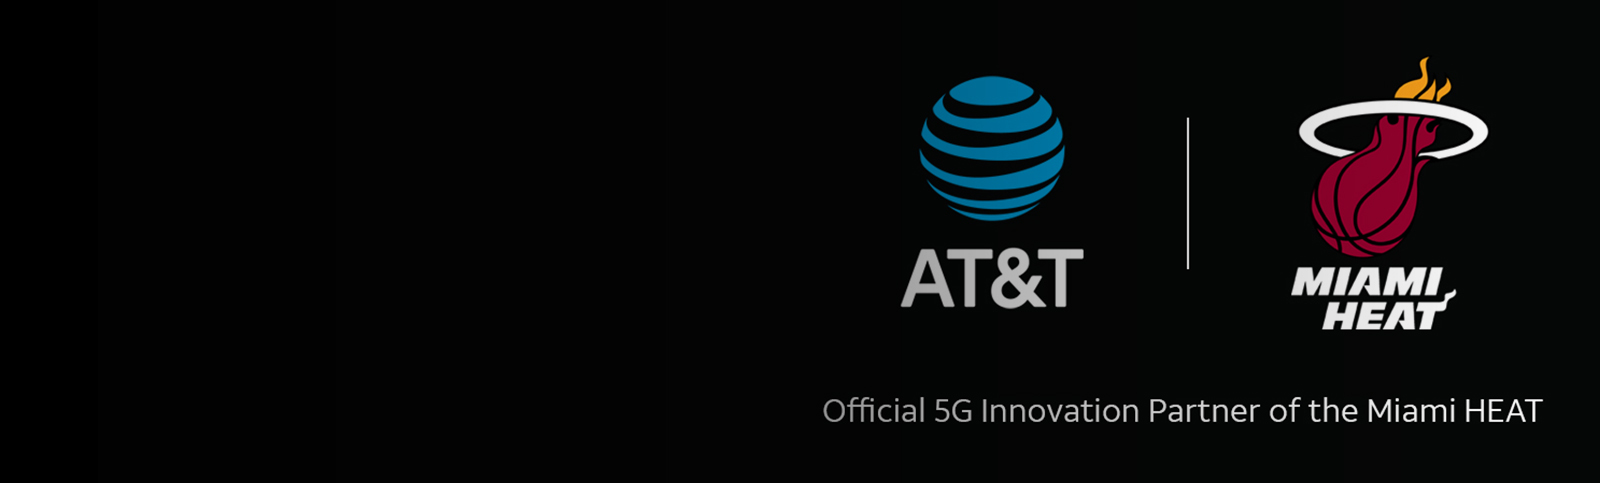 Banner with the AT&T and Miami HEAT logo, AT&T is the official 5G innovation partner of the Miami HEAT